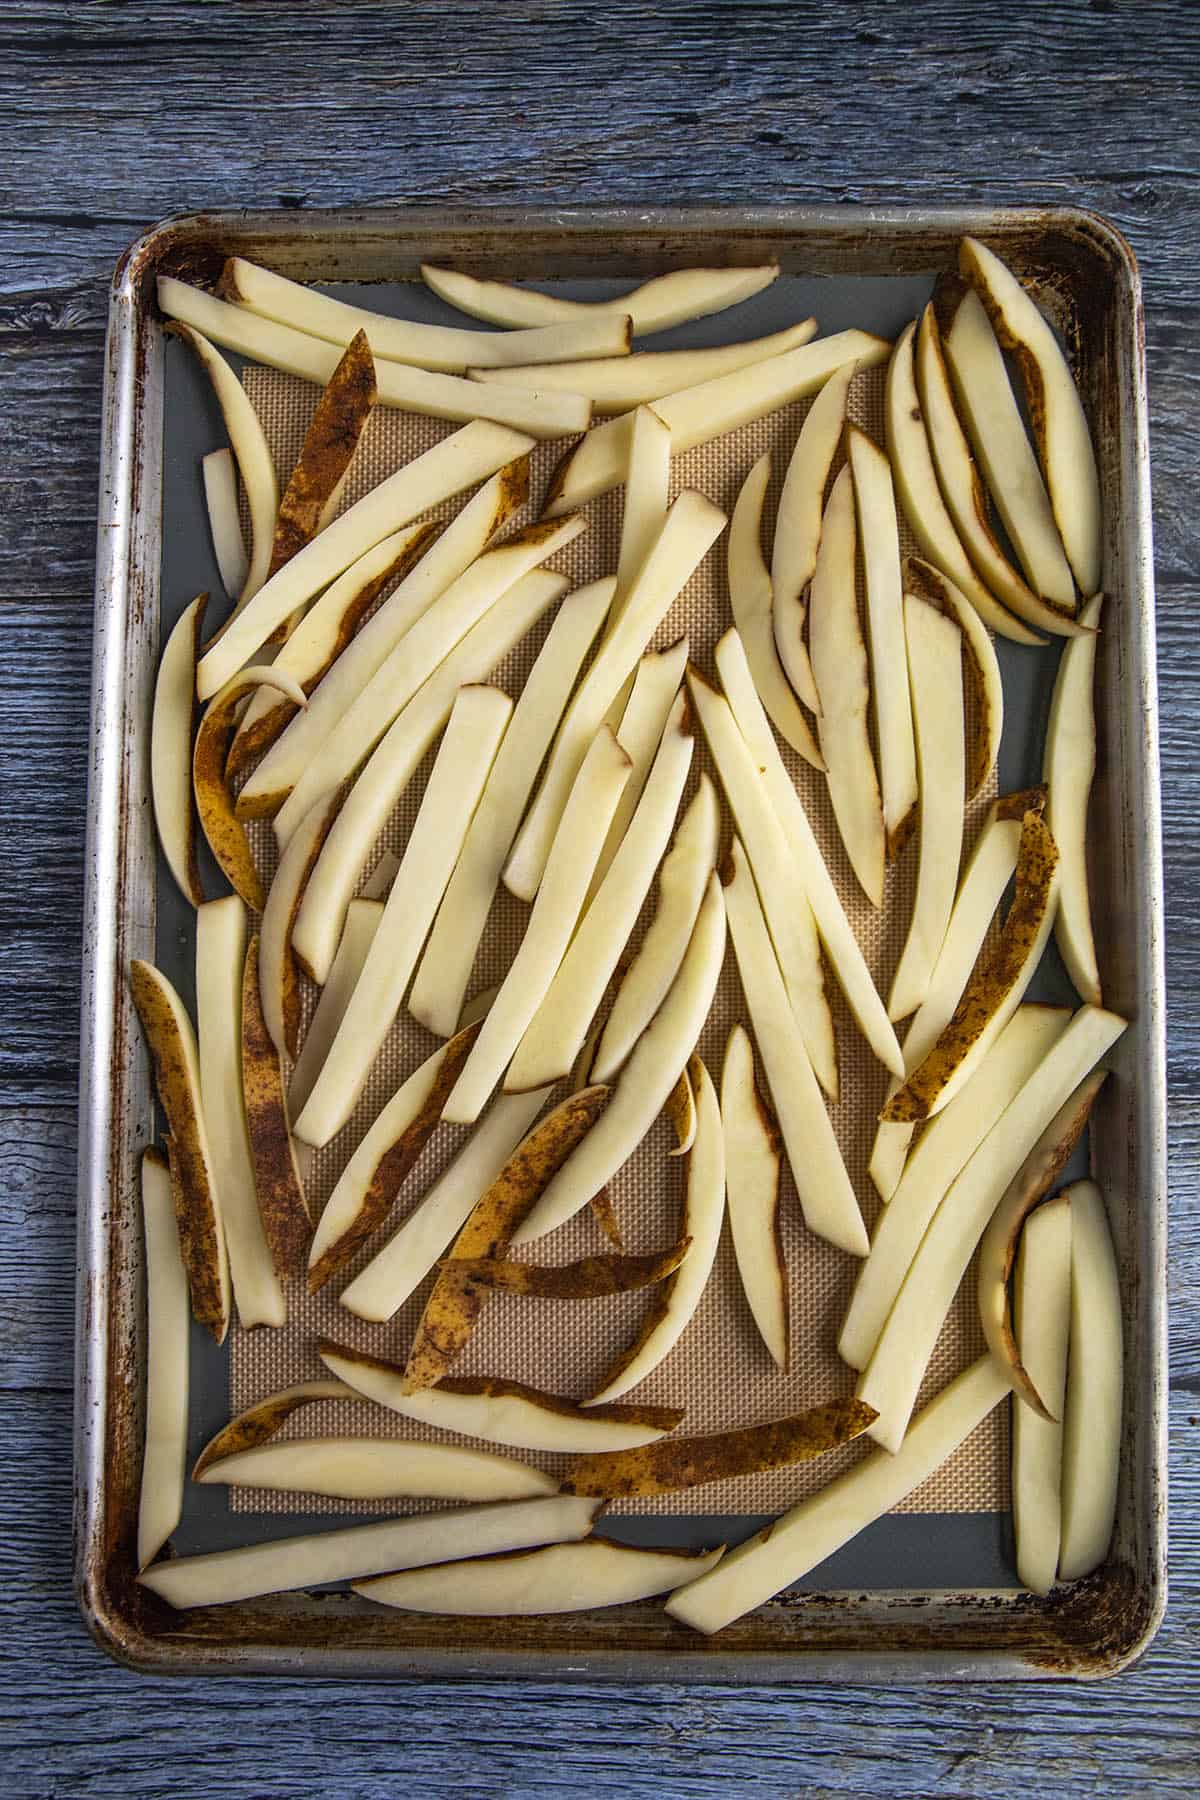 Sliced potatoes for making french fries, on a platter